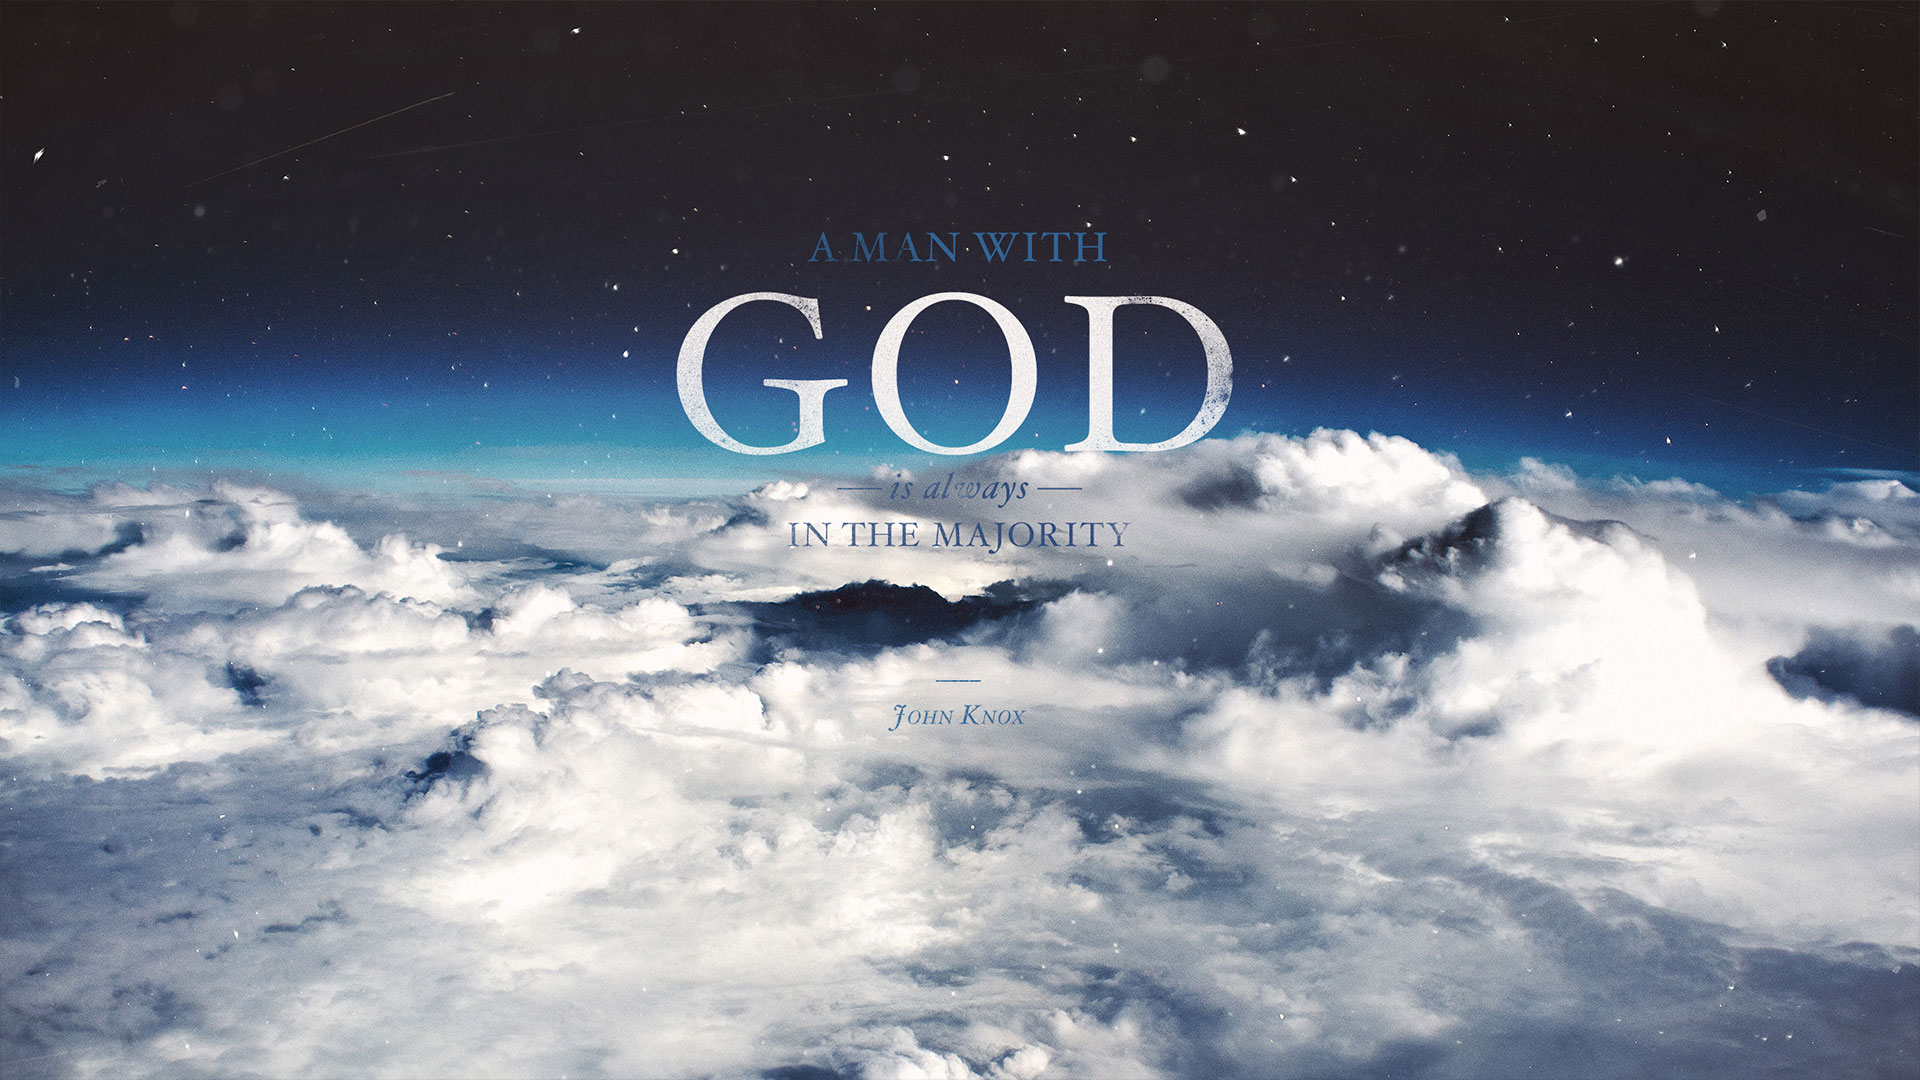 Wednesday Wallpaper: A Man with God is Always in the Majority